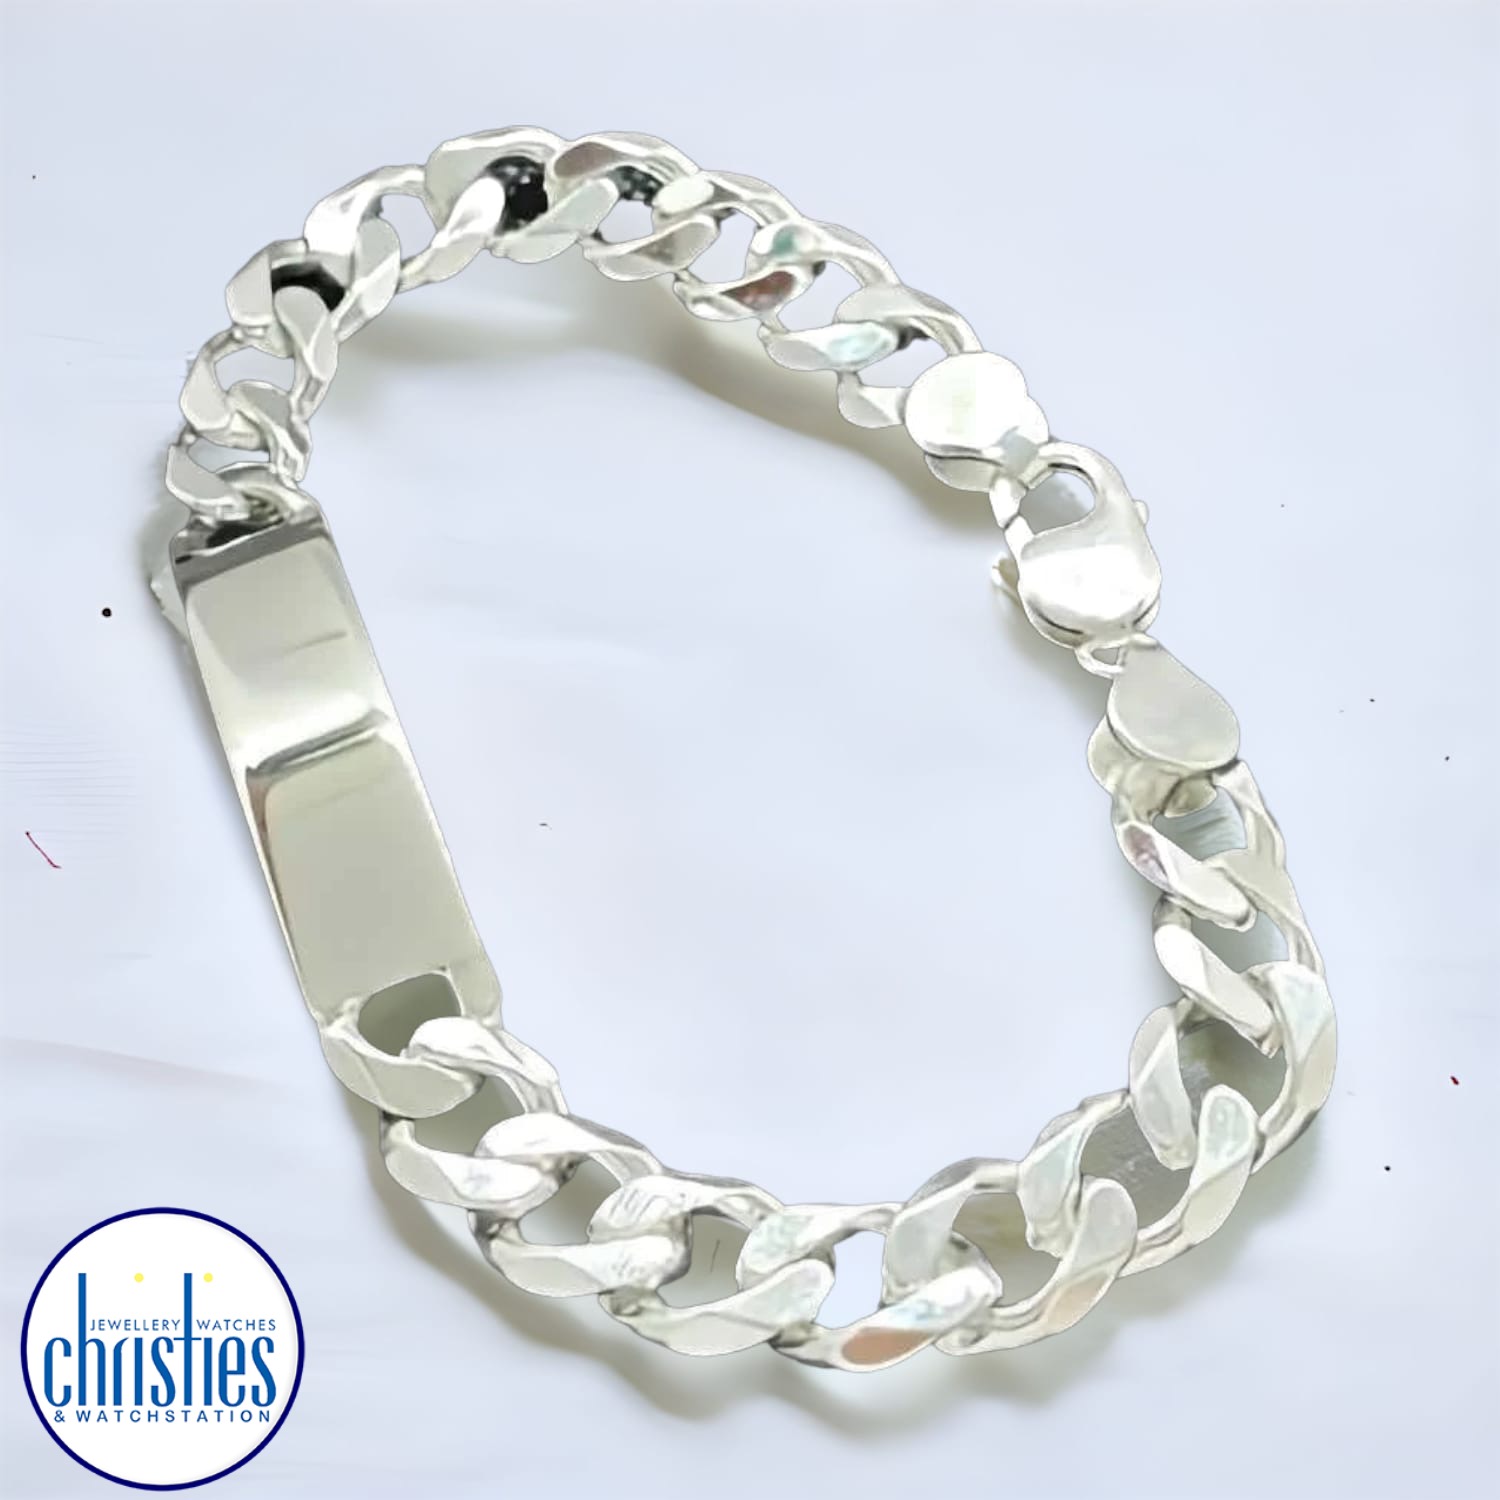 IDCD300H6C25 Sterling Silver ID Curb Link Heavy Bracelet. Heavy weight  Identification bracelet crafted in 925 sterling silver  Afterpay - Split your purchase into 4 instalments - Pay for your purchase over 4 instalments, due every two weeks. You’ll pay @